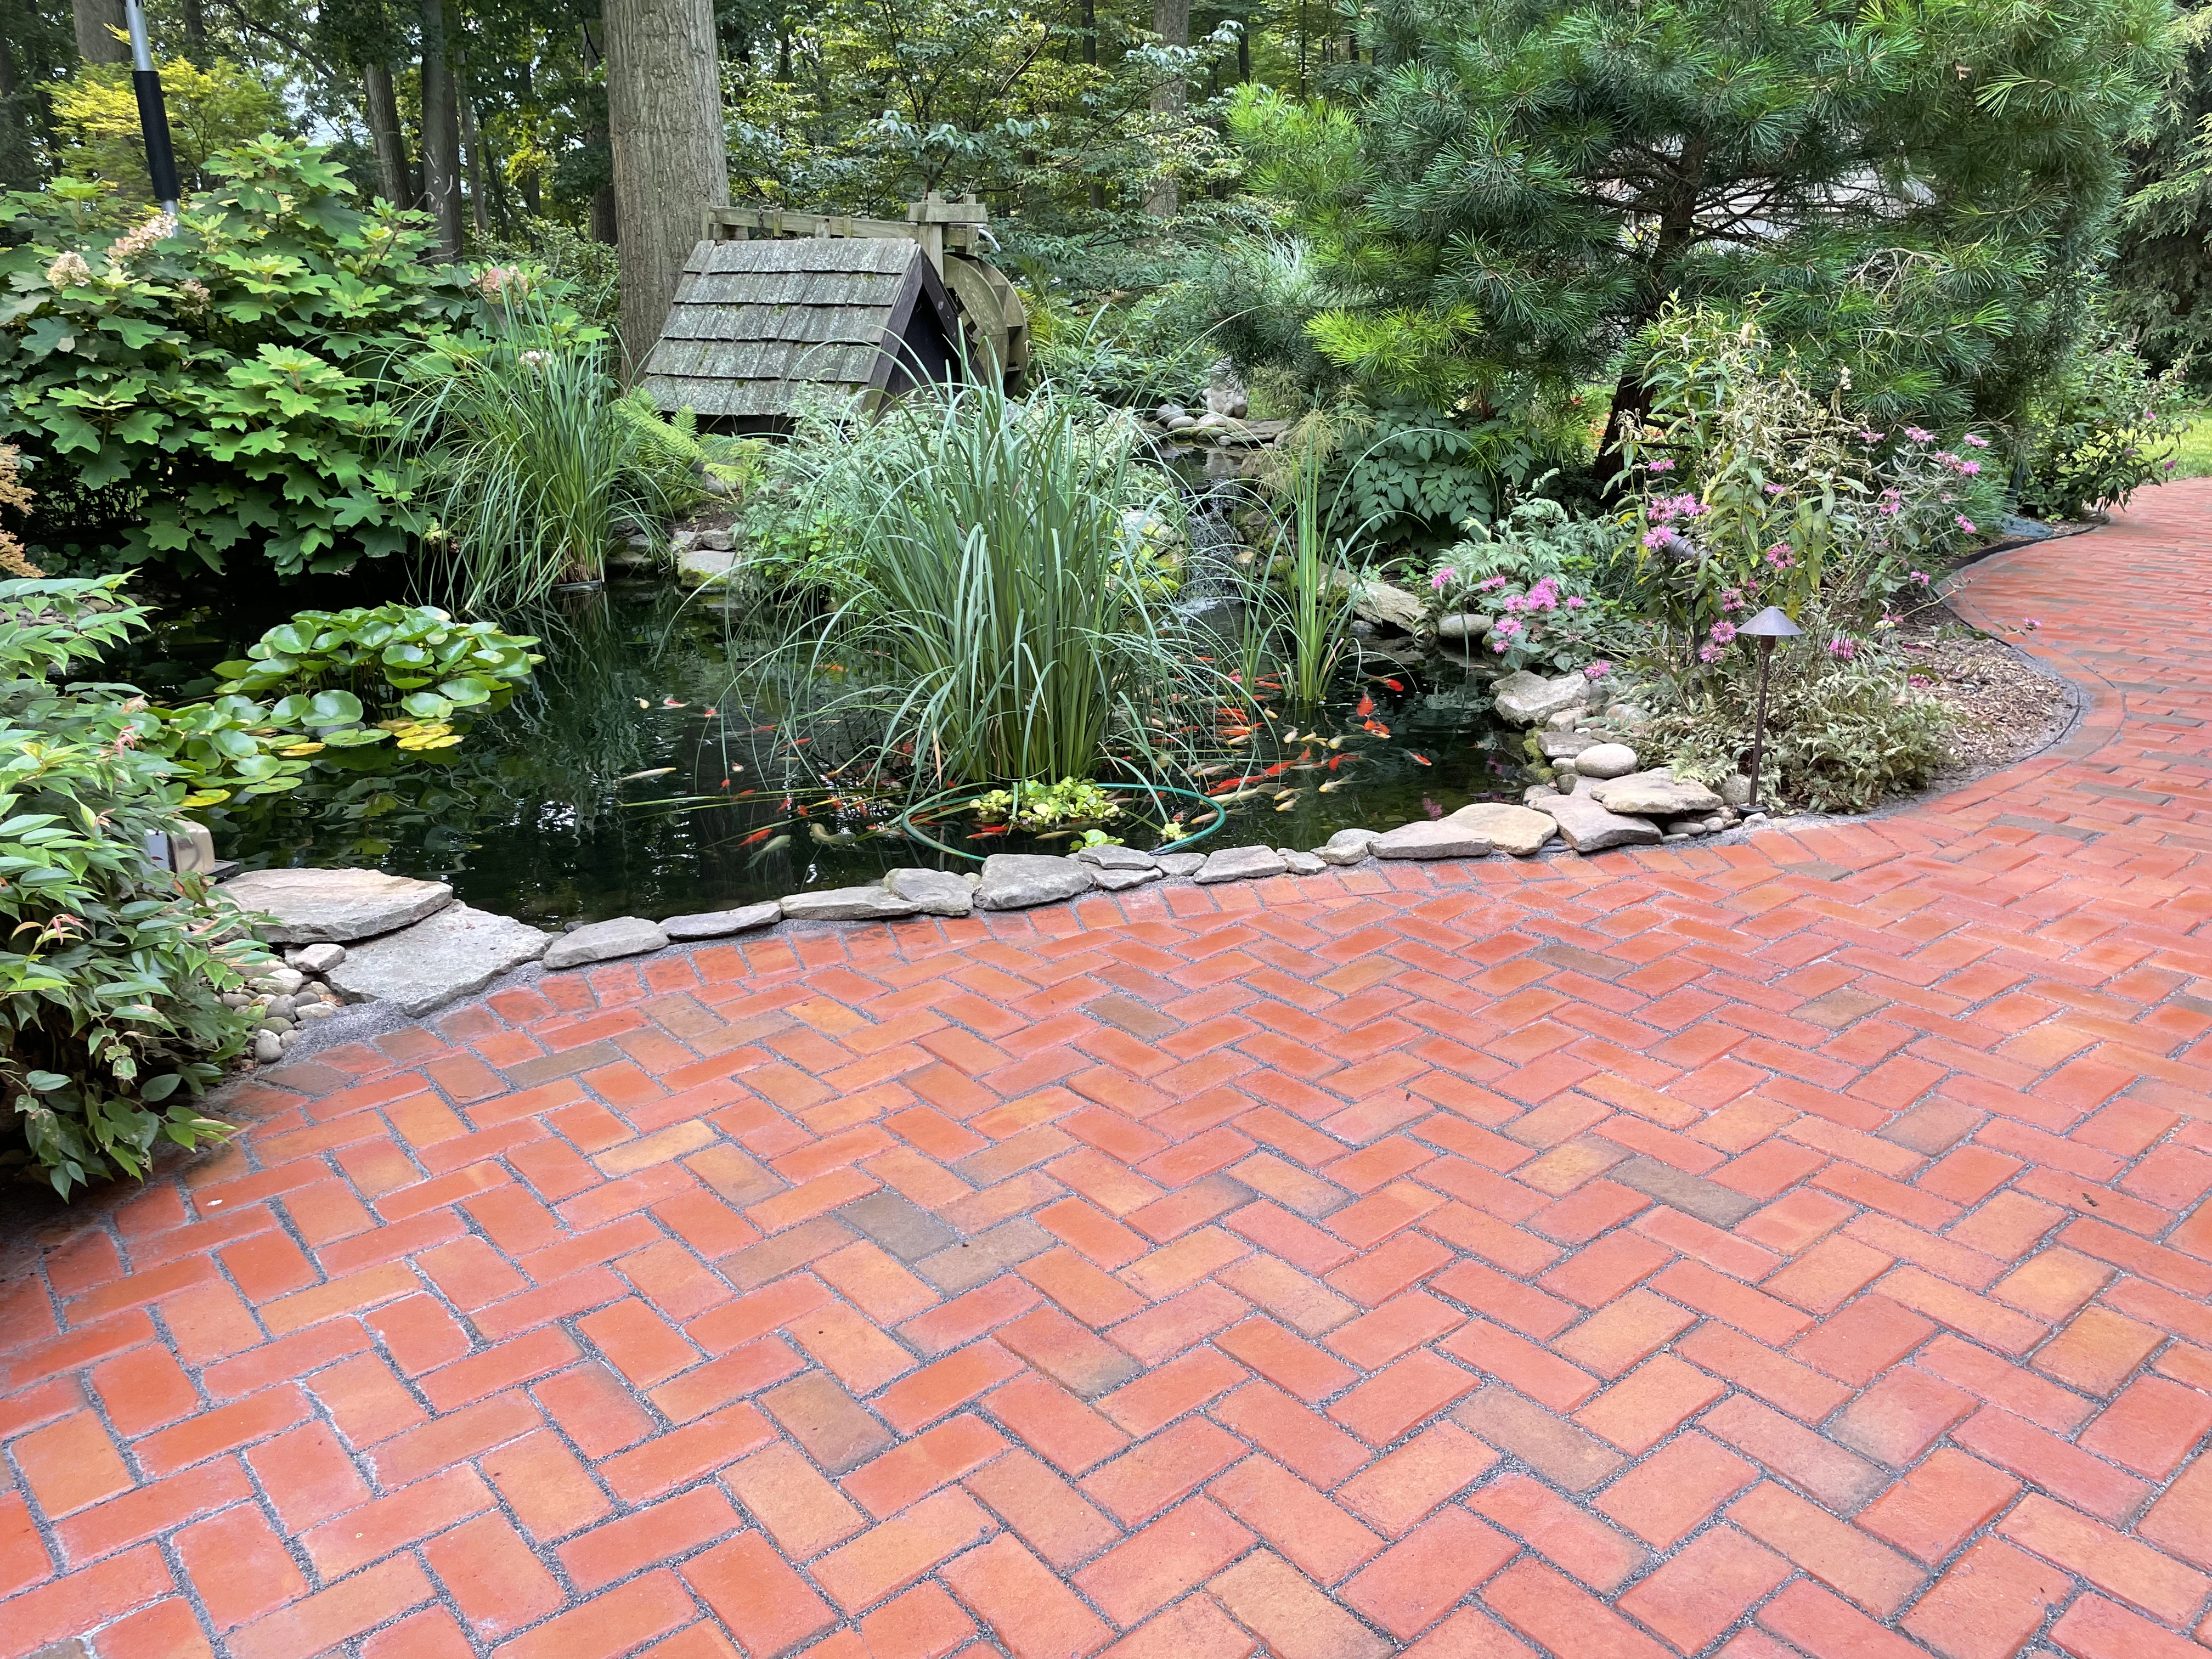 Top rated power washing service in Selinsgrove PA by NextGen Power Wash LLC